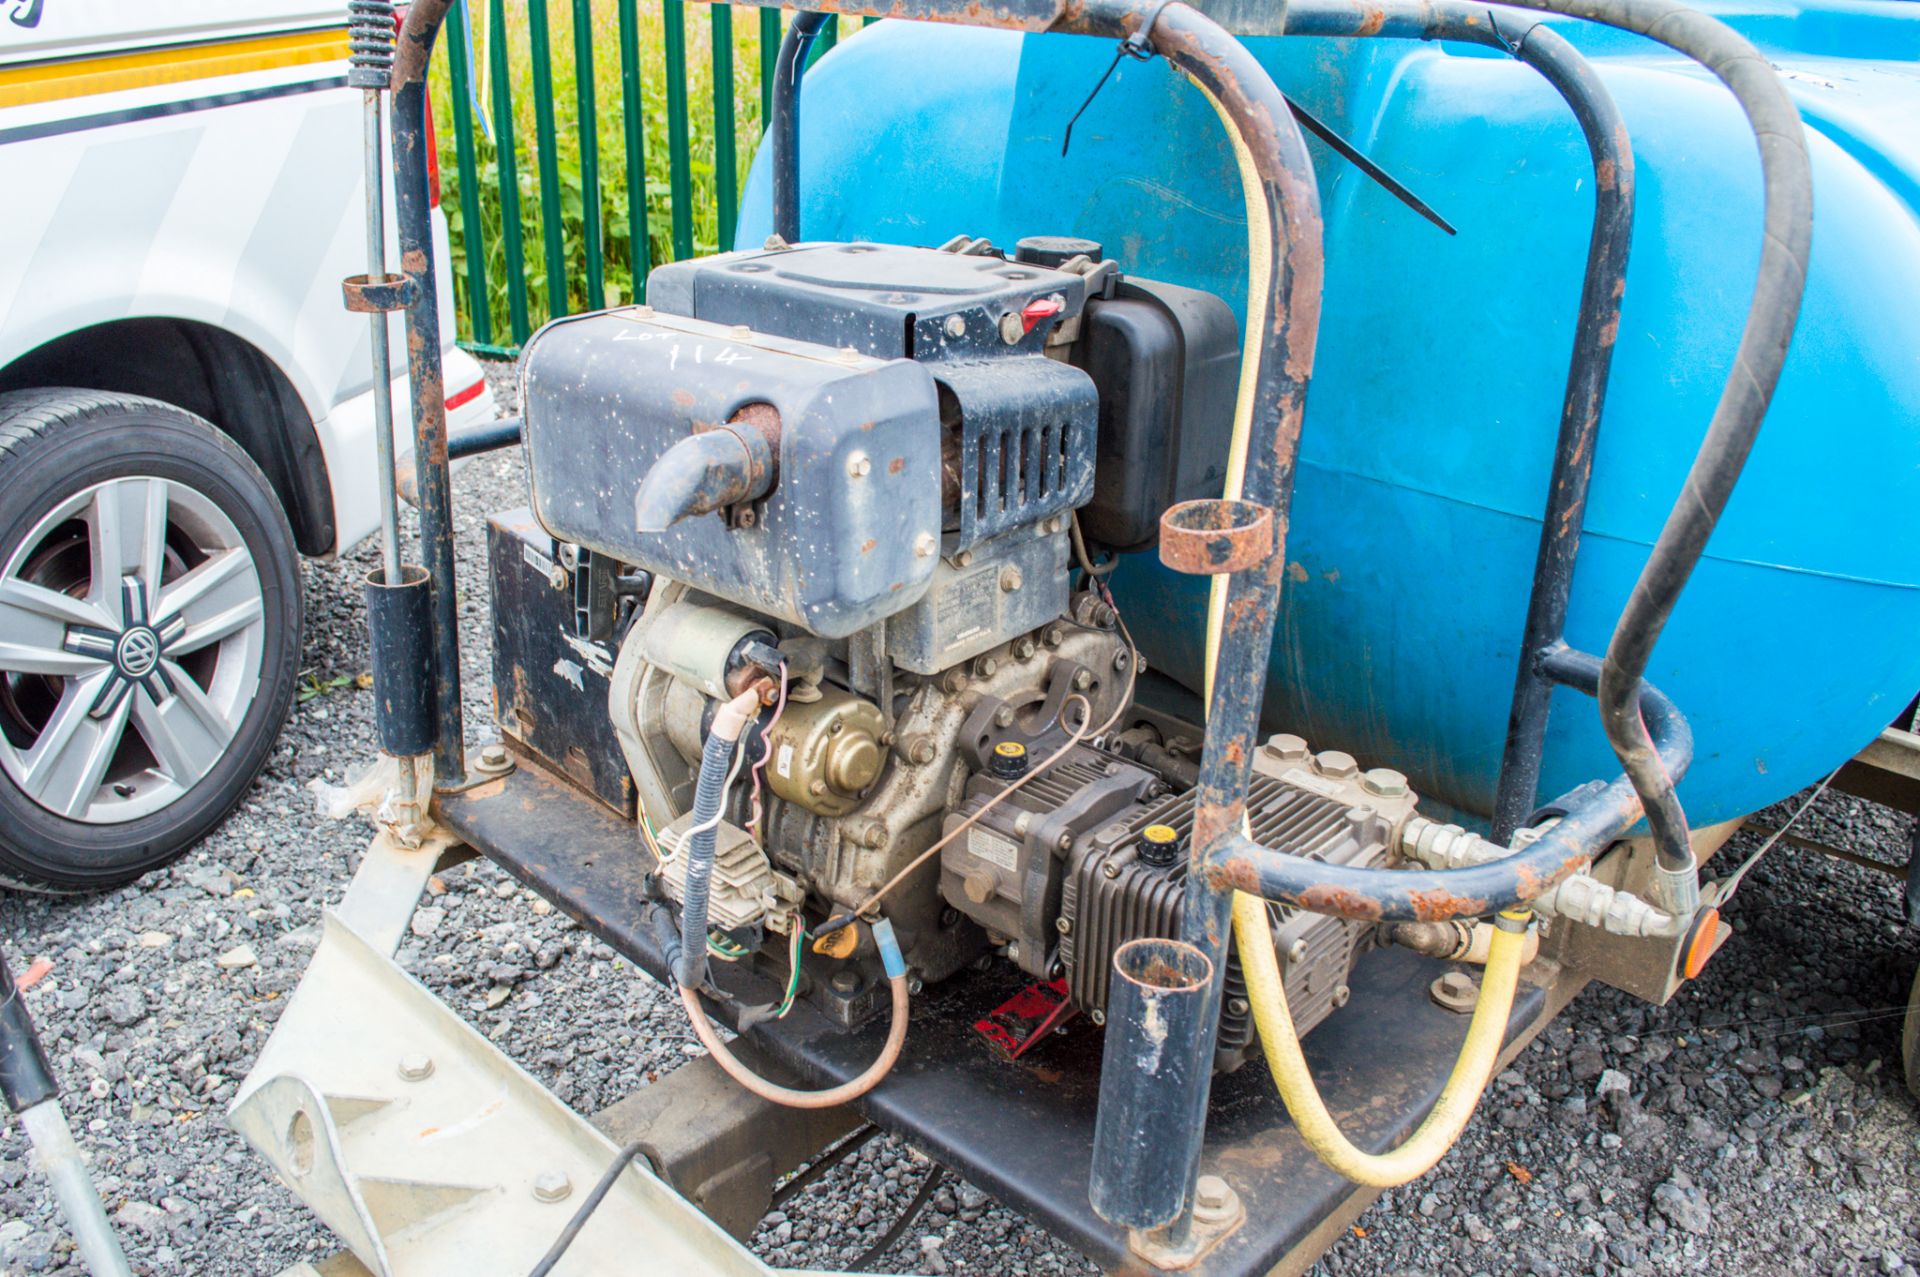 Trailer Engineering fast tow diesel driven pressure washer bowser - Image 2 of 3